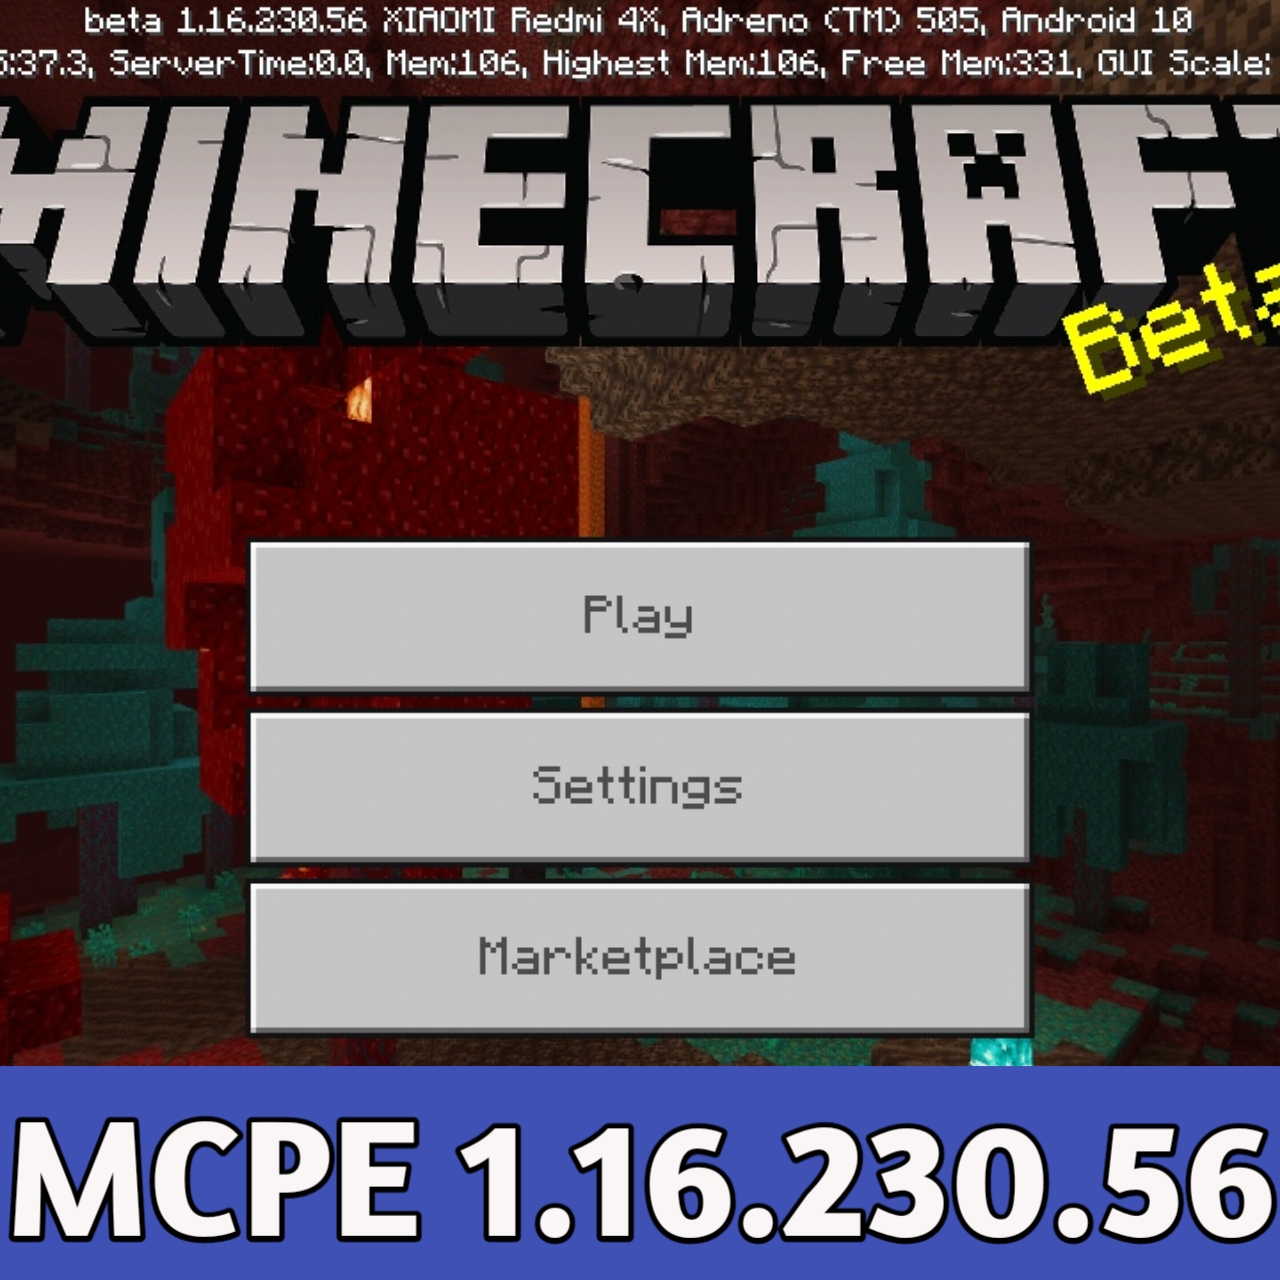 How To Install Minecraft 1.16 on Mac OS / PC + Download Links